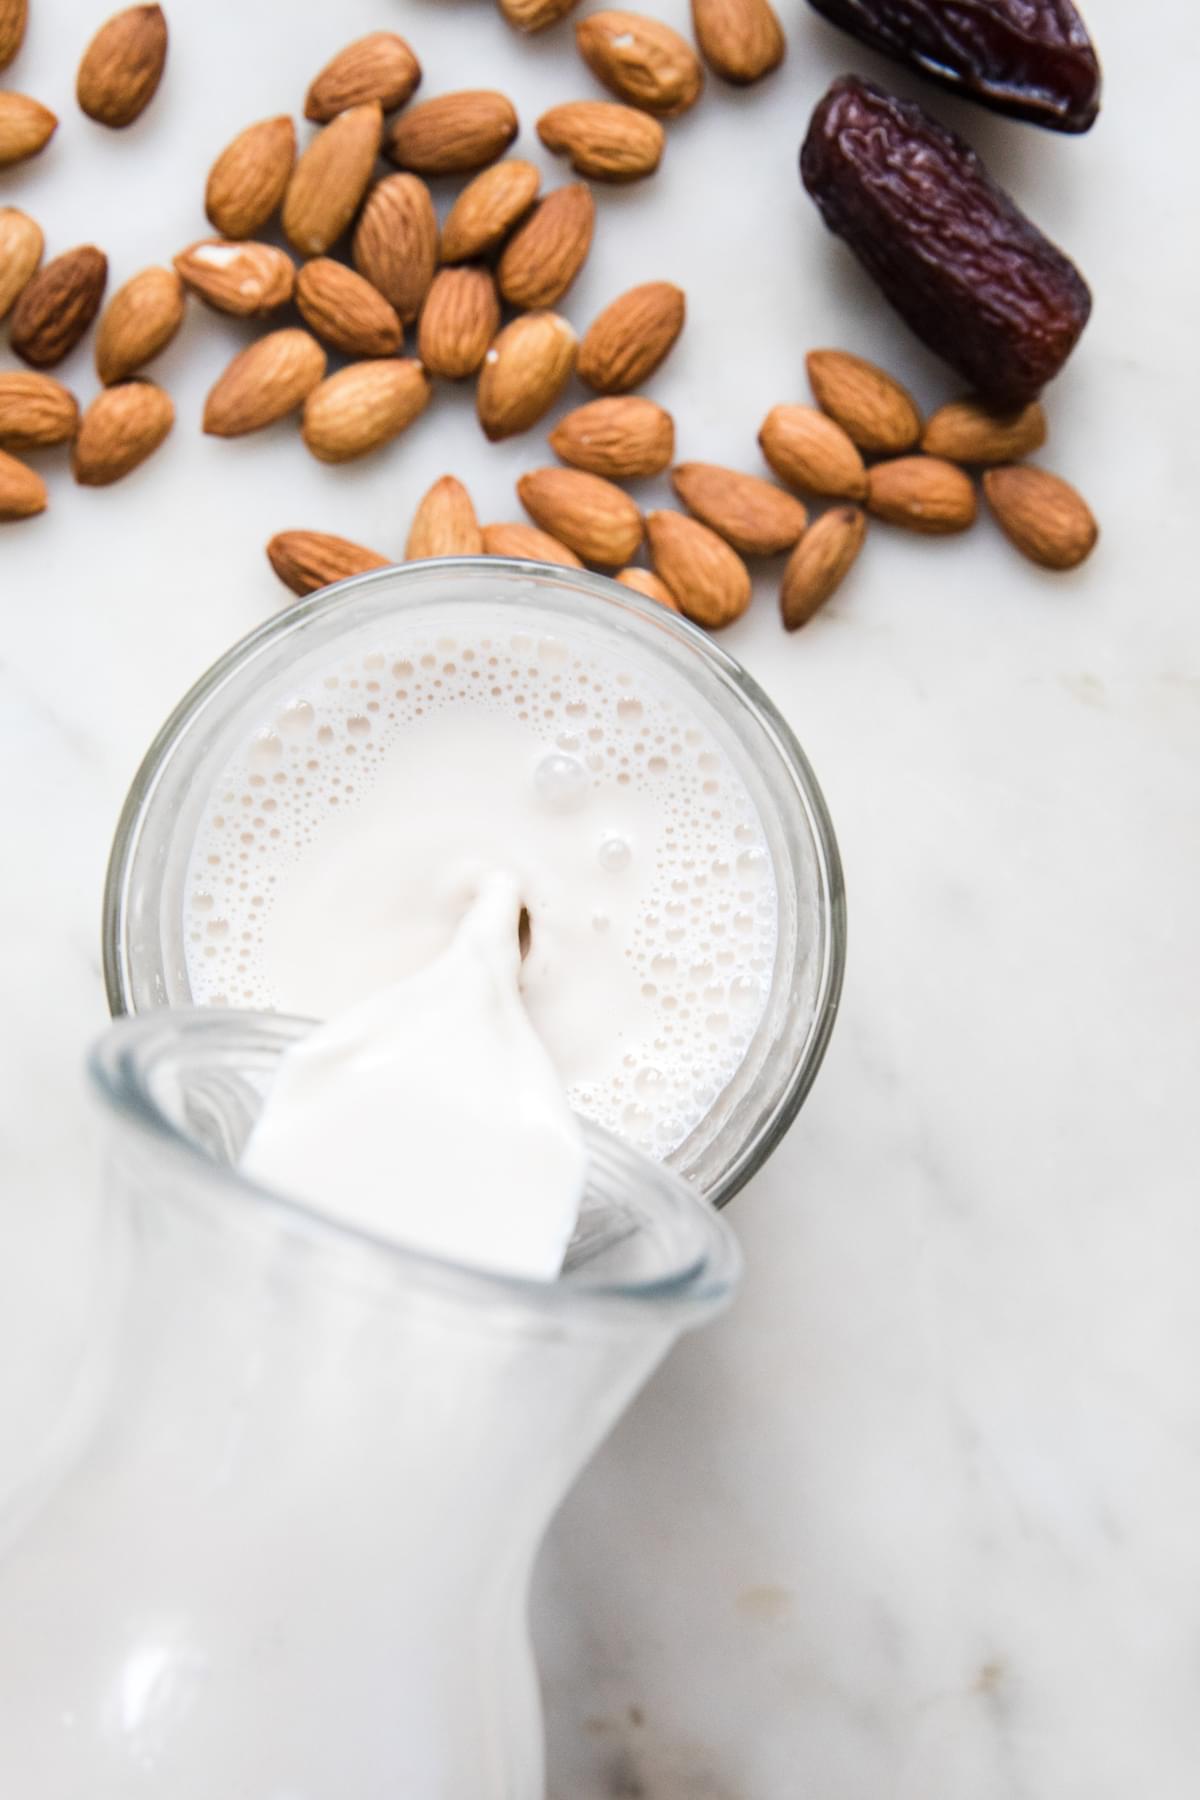 a carafe of homemade almond milk being poured into a glass surrounded by almonds and dates on the counter